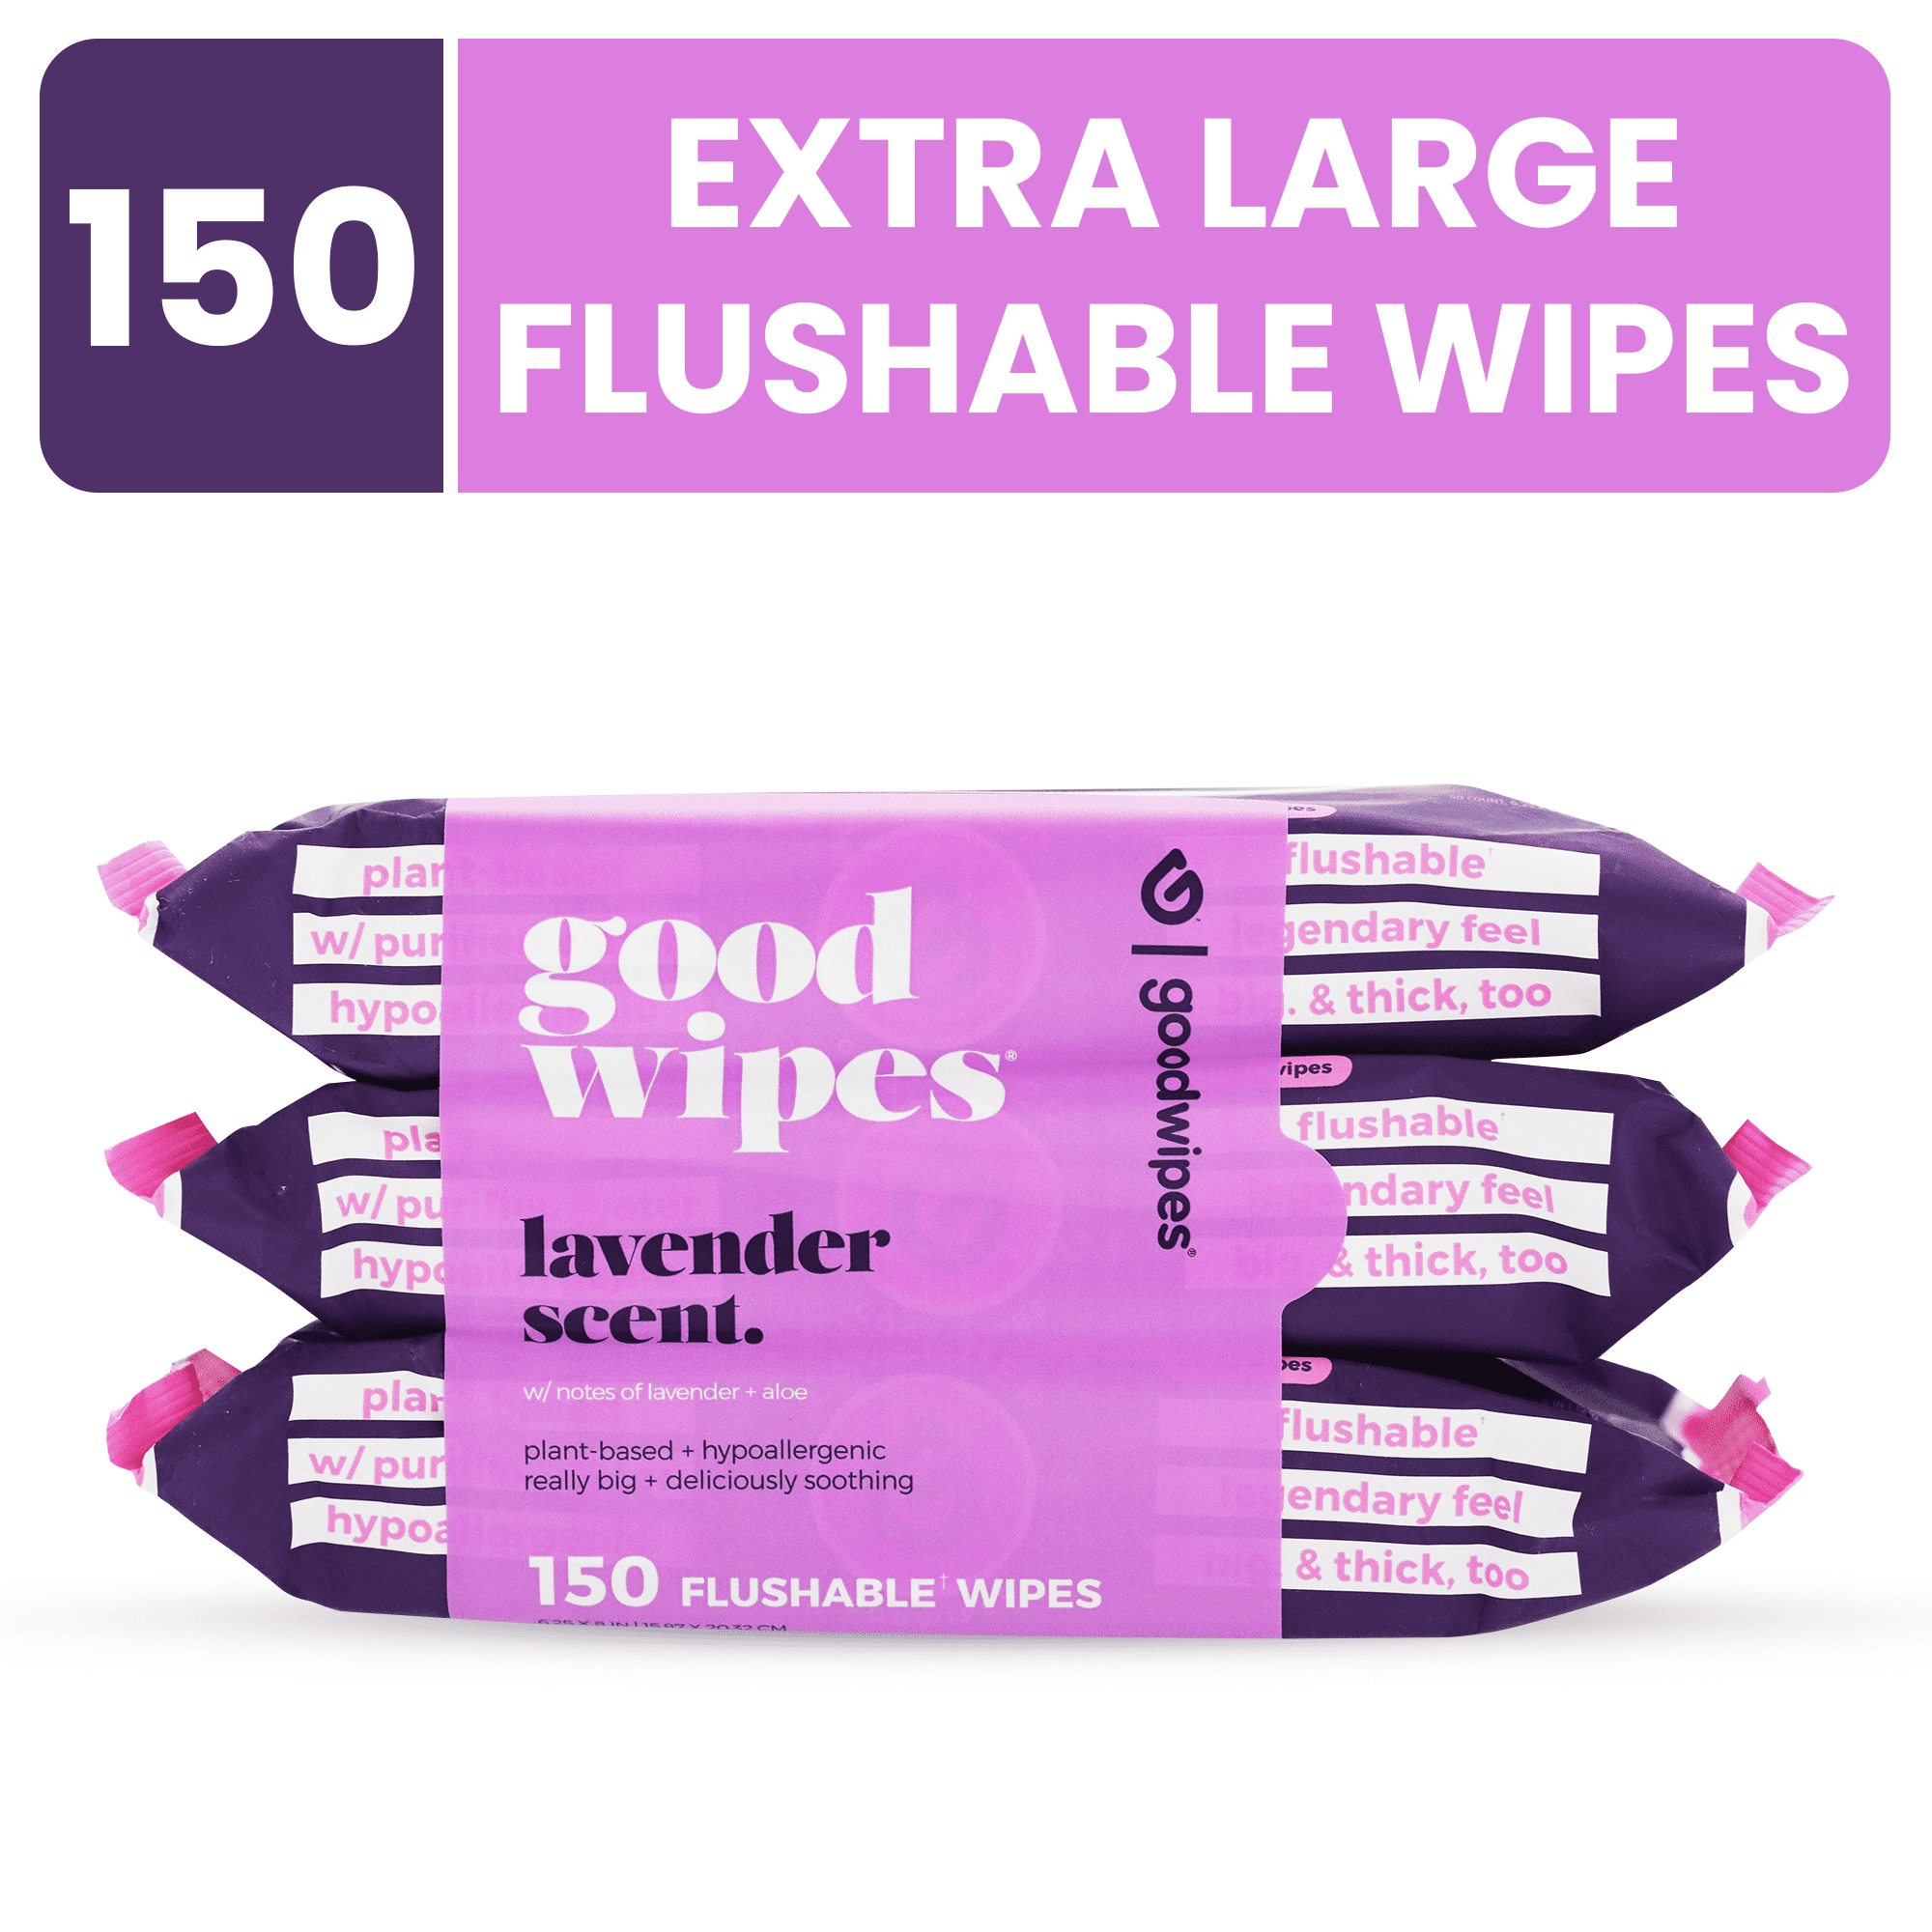 Goodwipes Flushable & Biodegradable Wipes with Botanicals, Lavender, 3 Packs (150 Total Wipes)